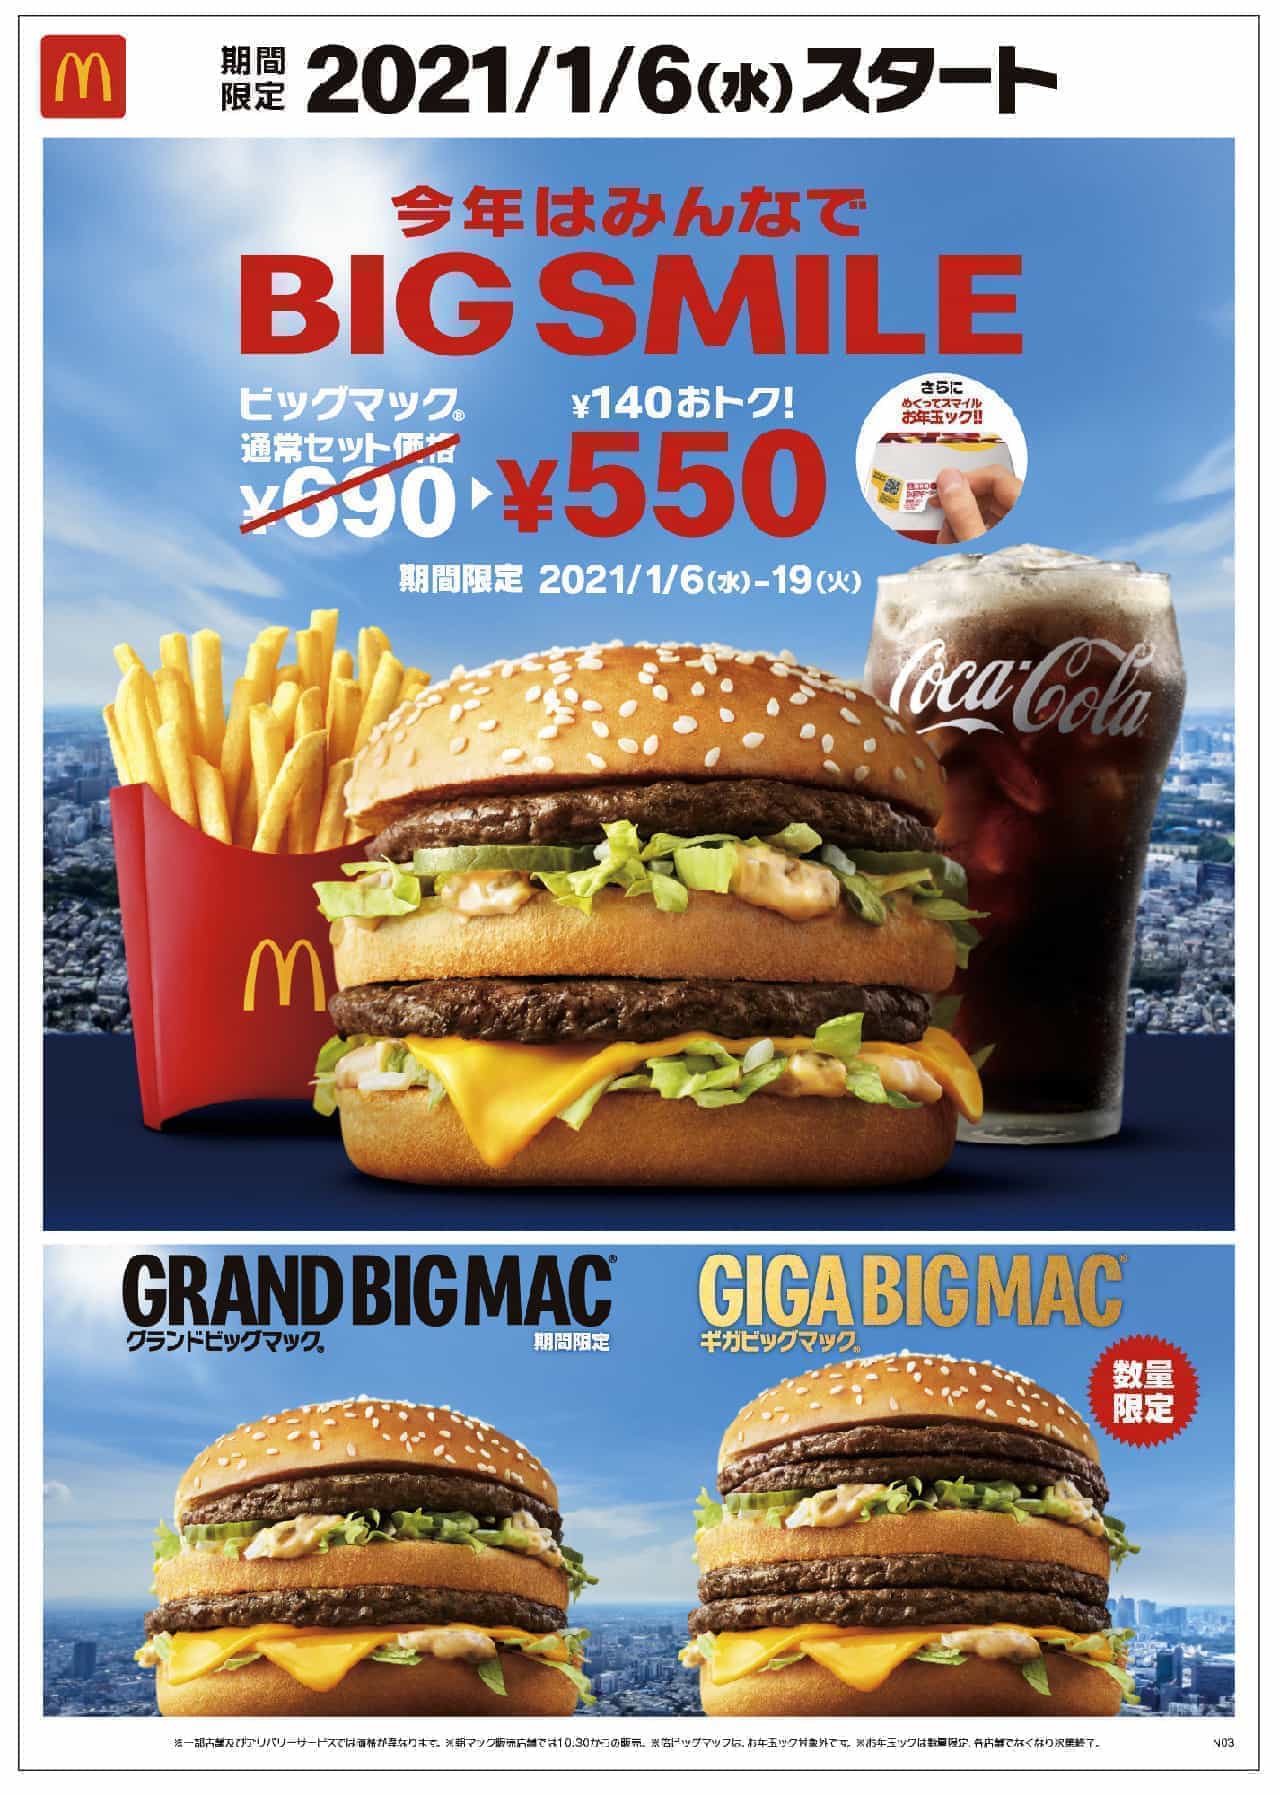 McDonald's "BIG SMILE" for everyone this year